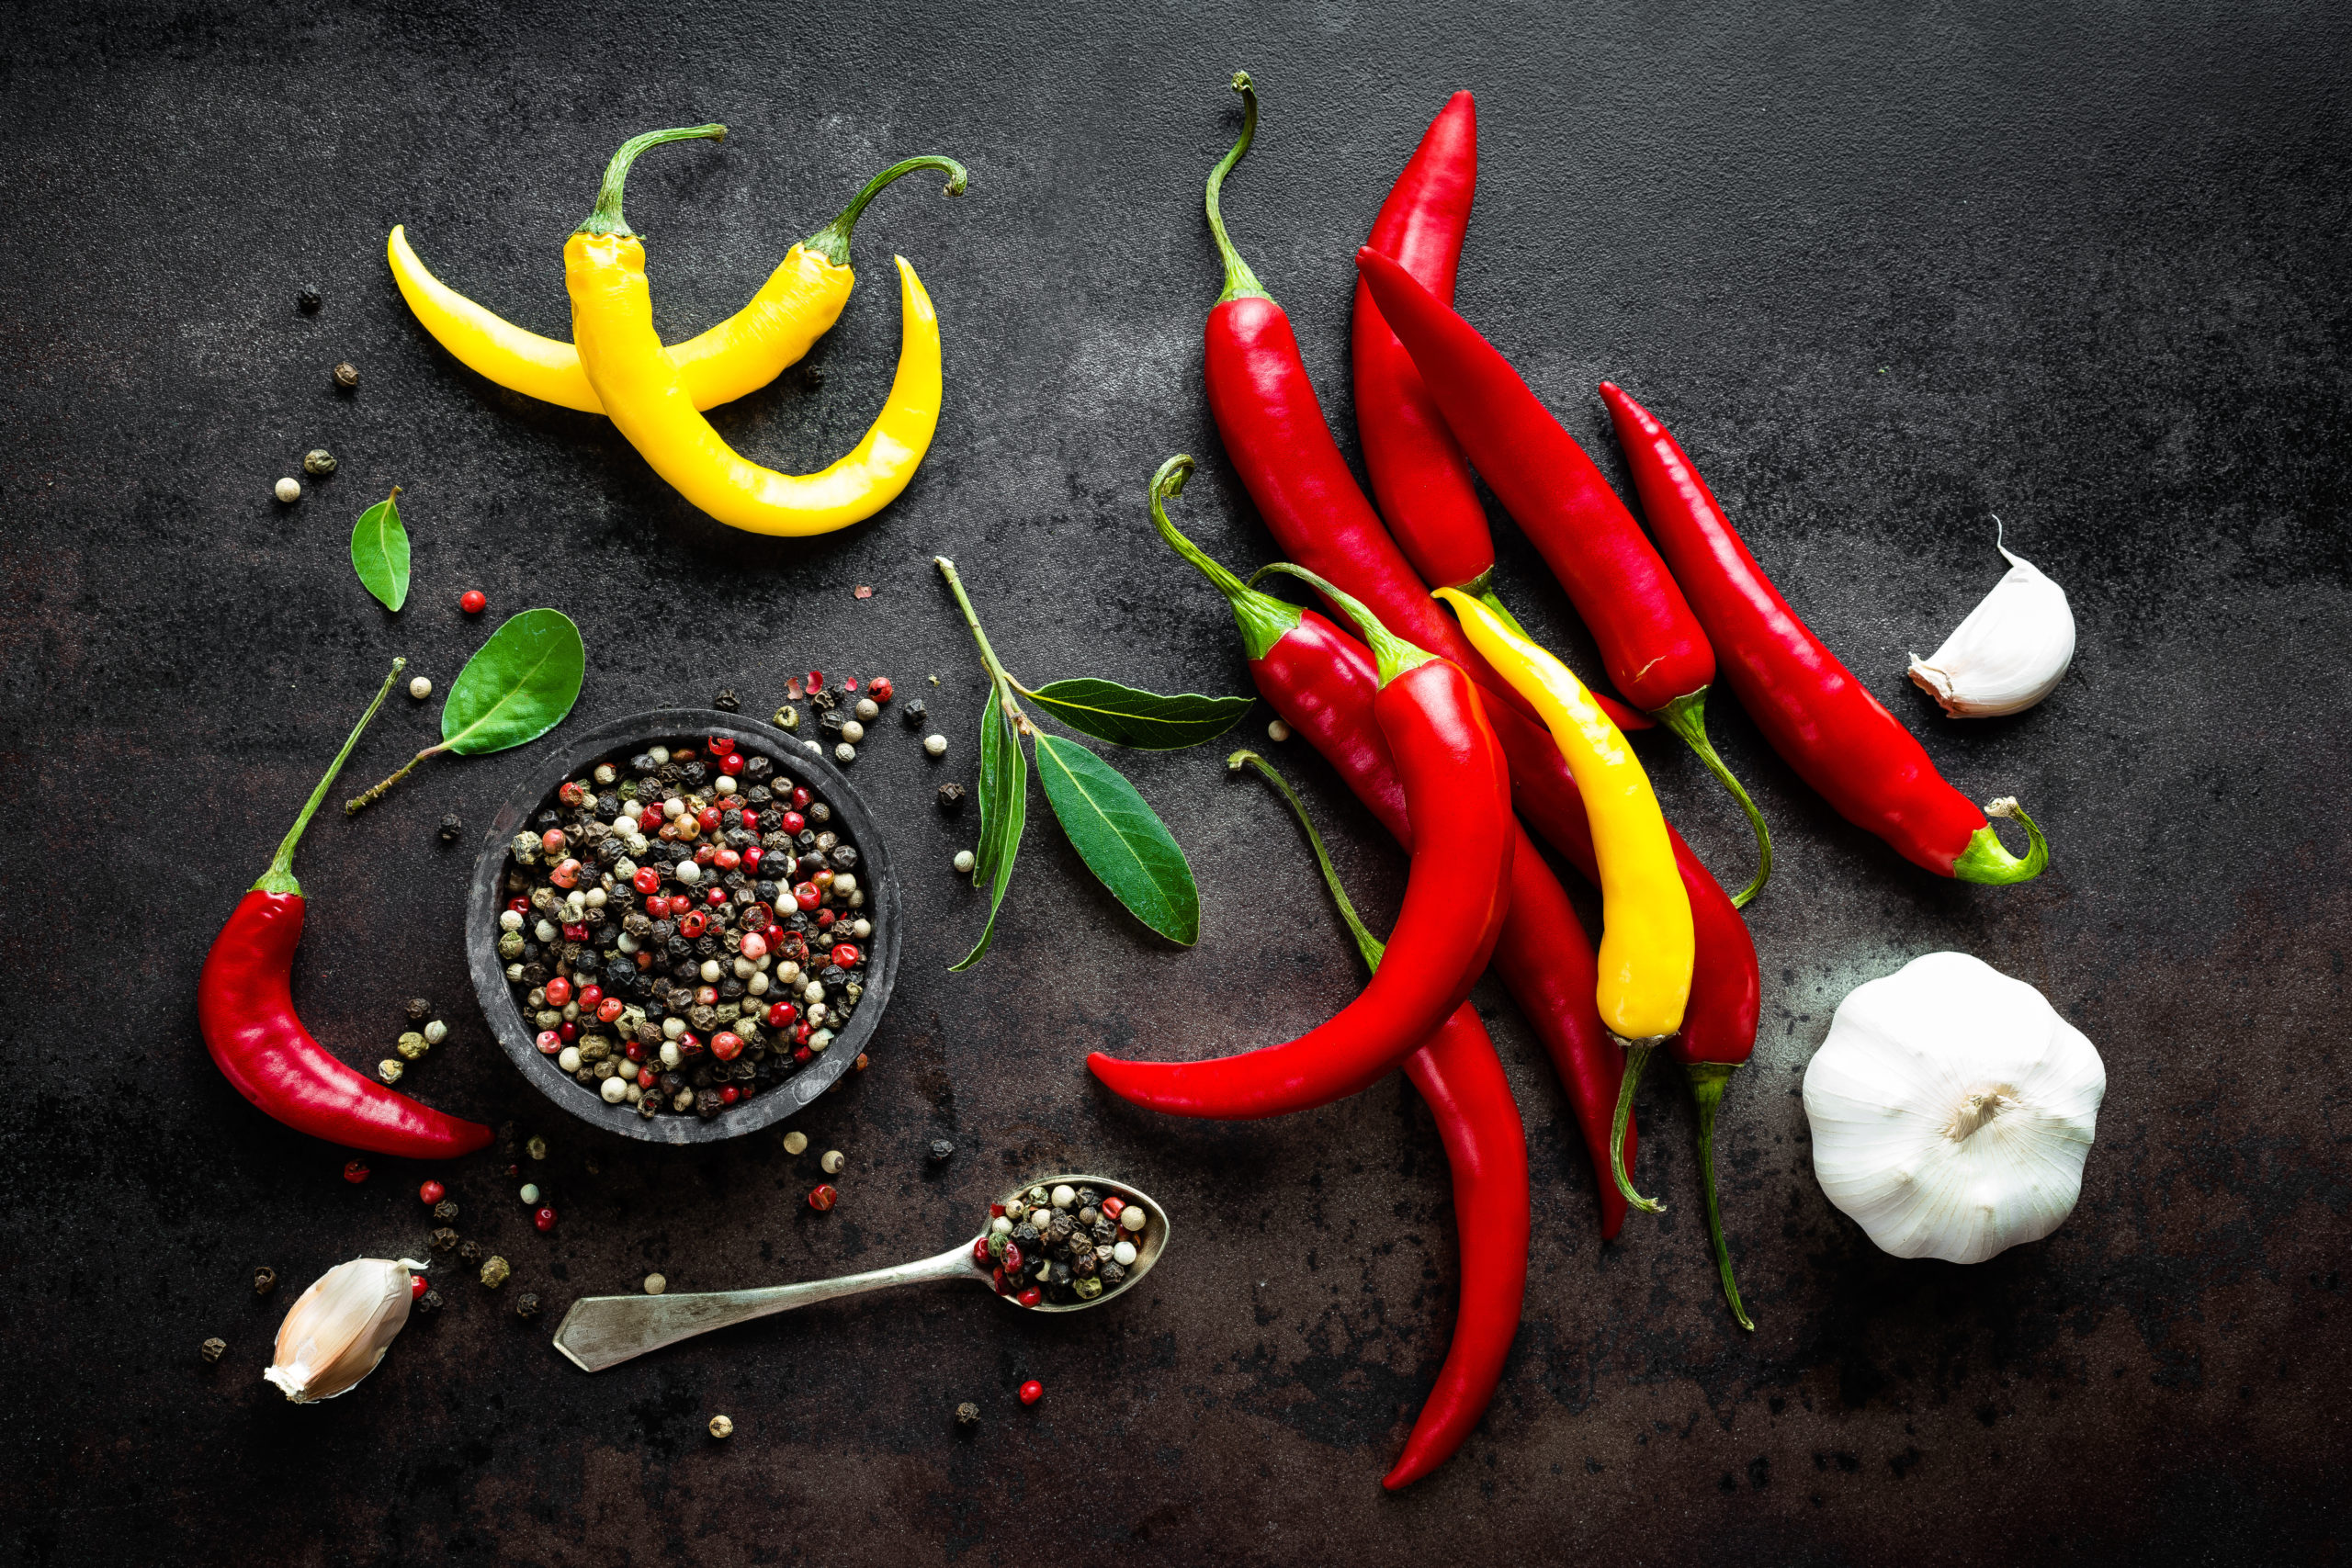 Recipes for International Hot &amp; Spicy Food Day - NetCost Market